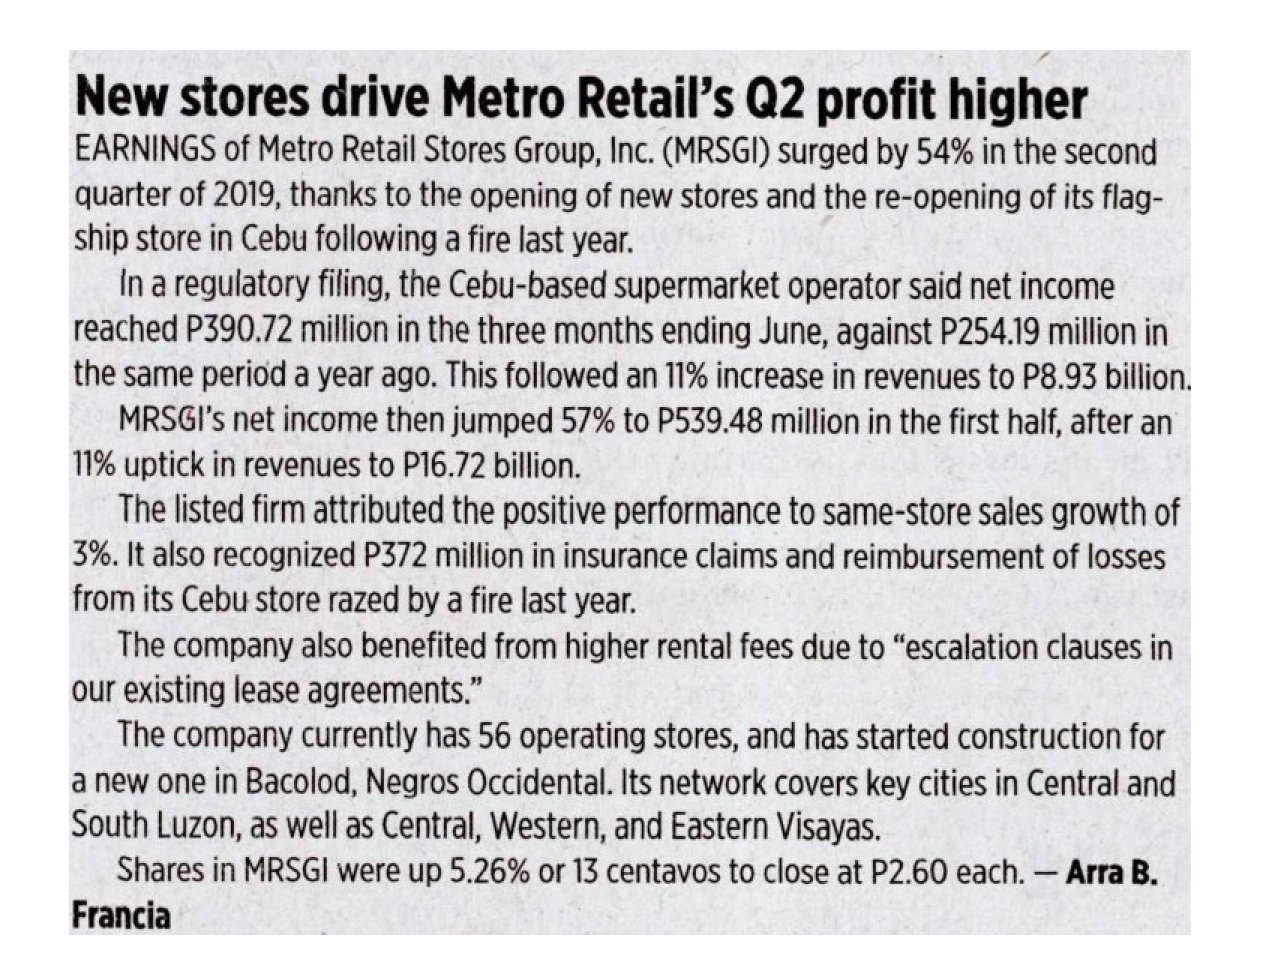 New stores drive Metro Retail's Q2 profit higher - Business World